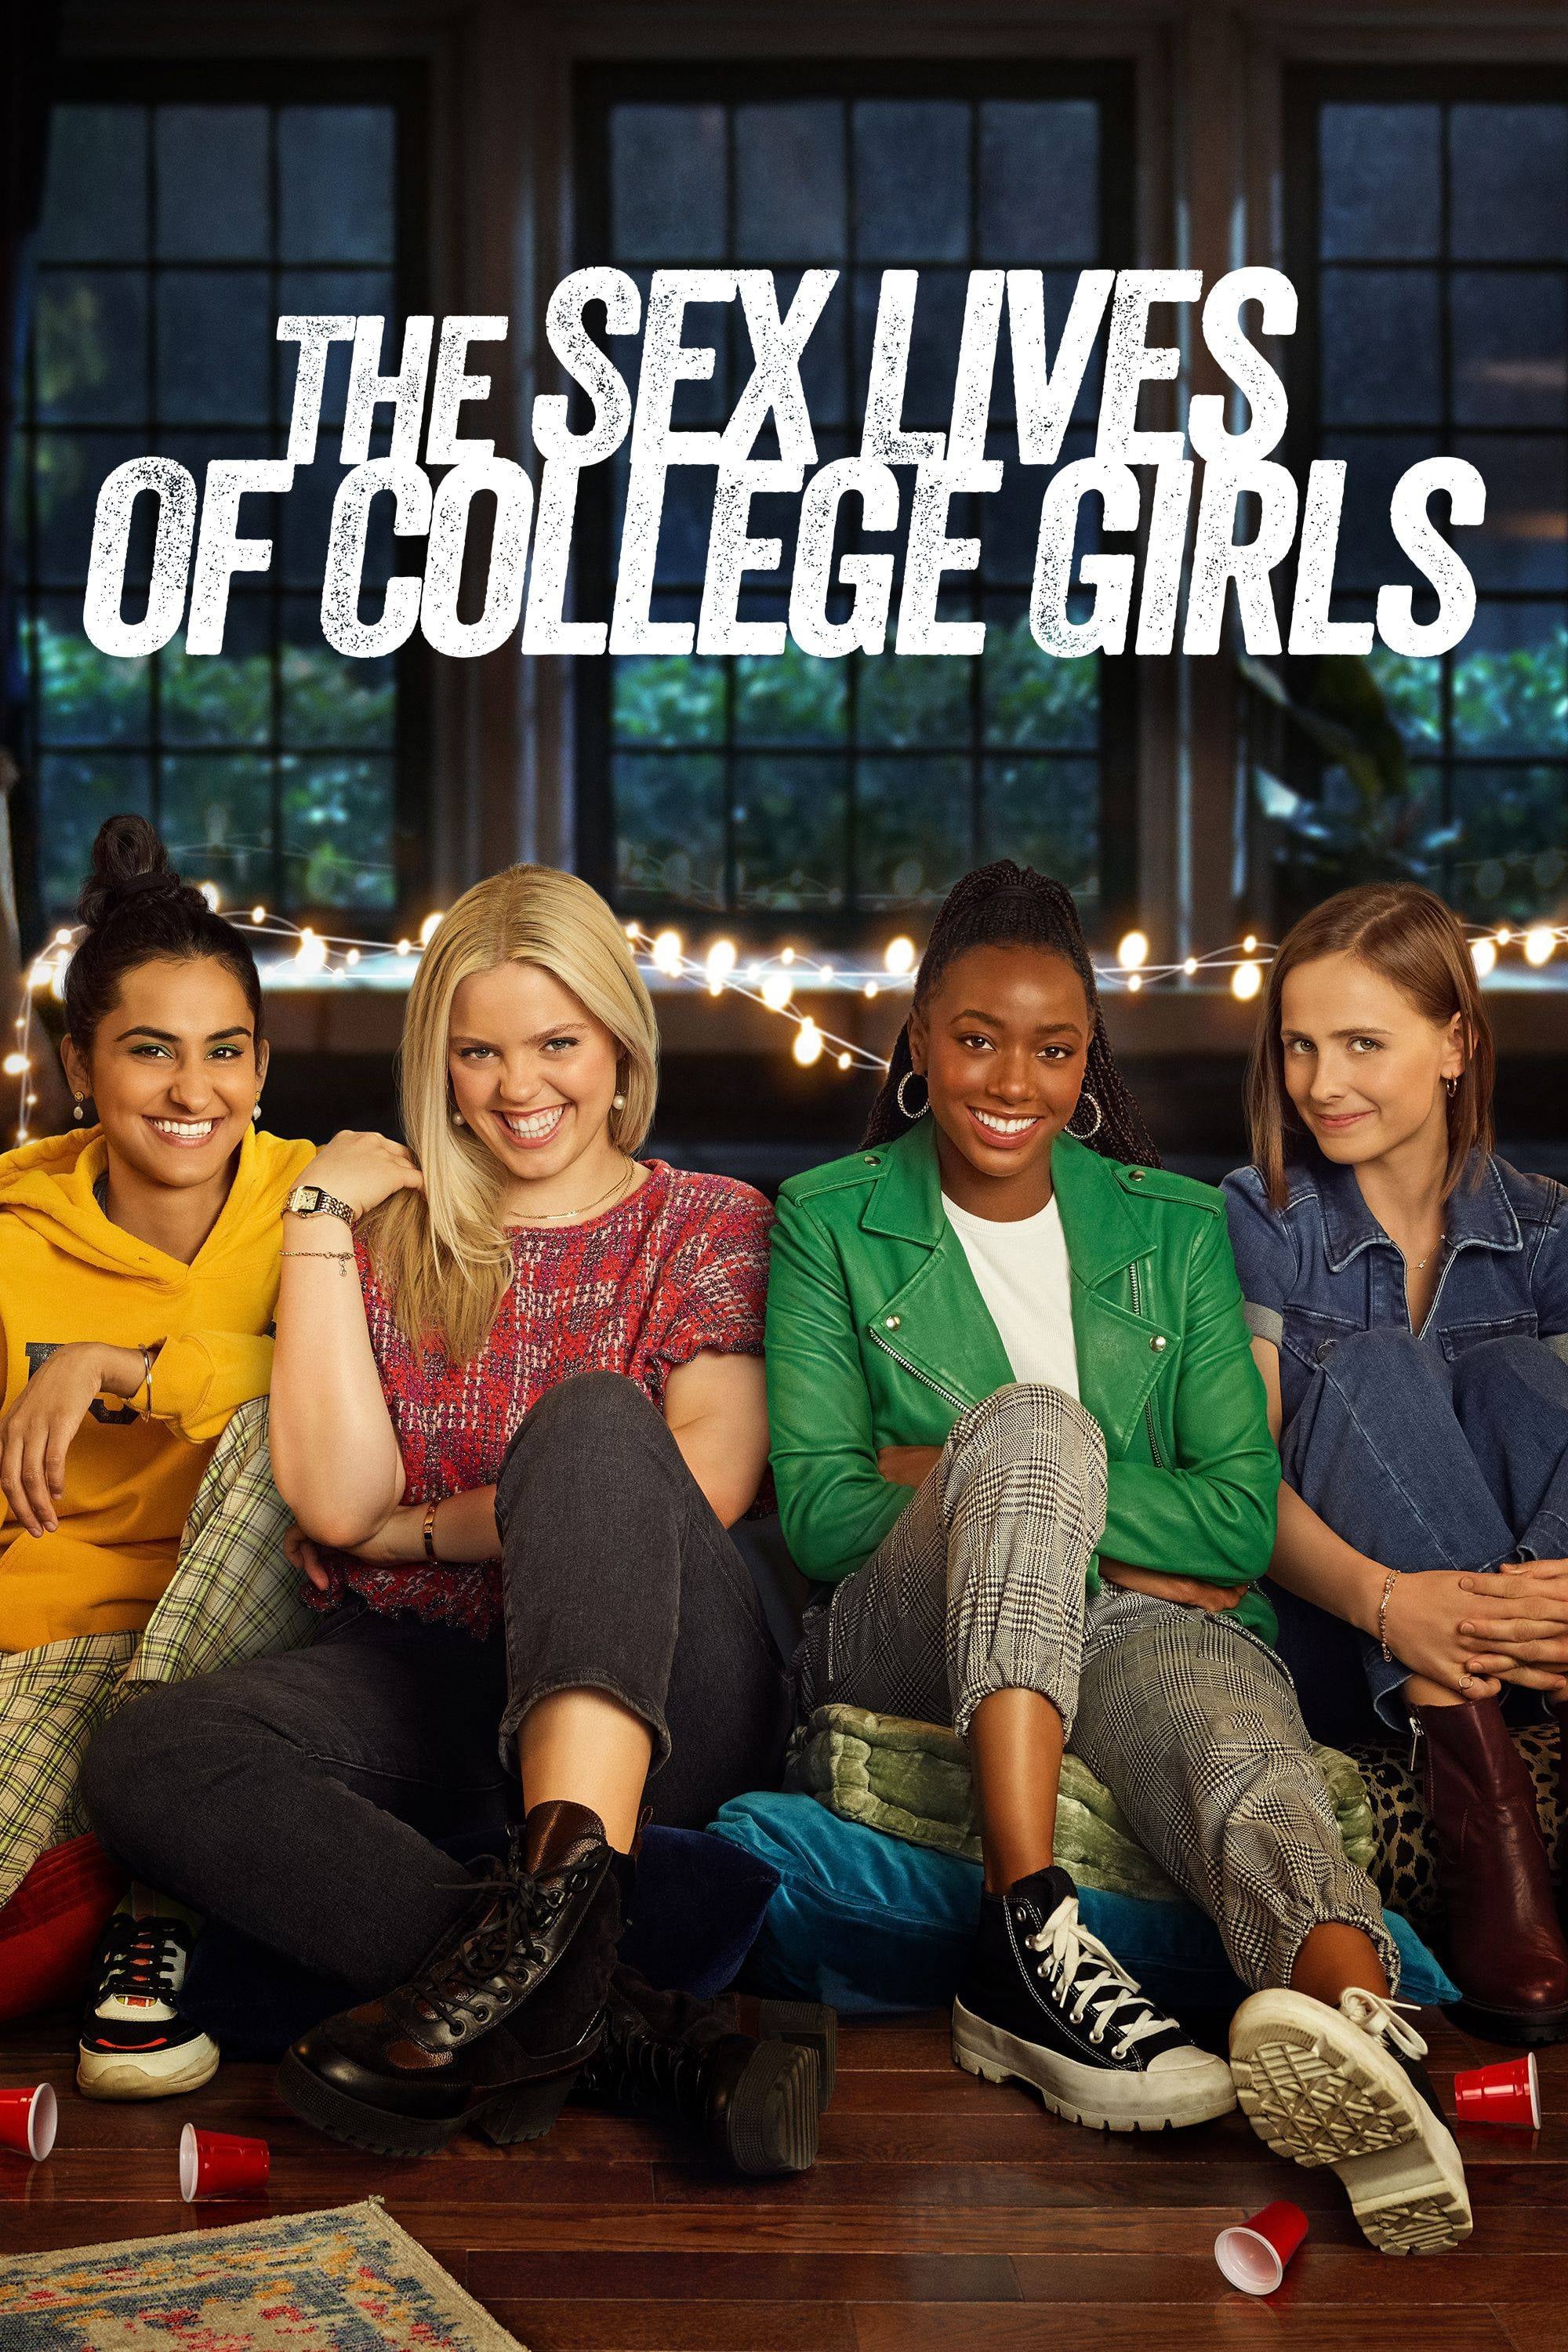 The Sex Lives of College Girls 2022 S02 English Complete Web Series 1080p HDRip 4.1GB Download